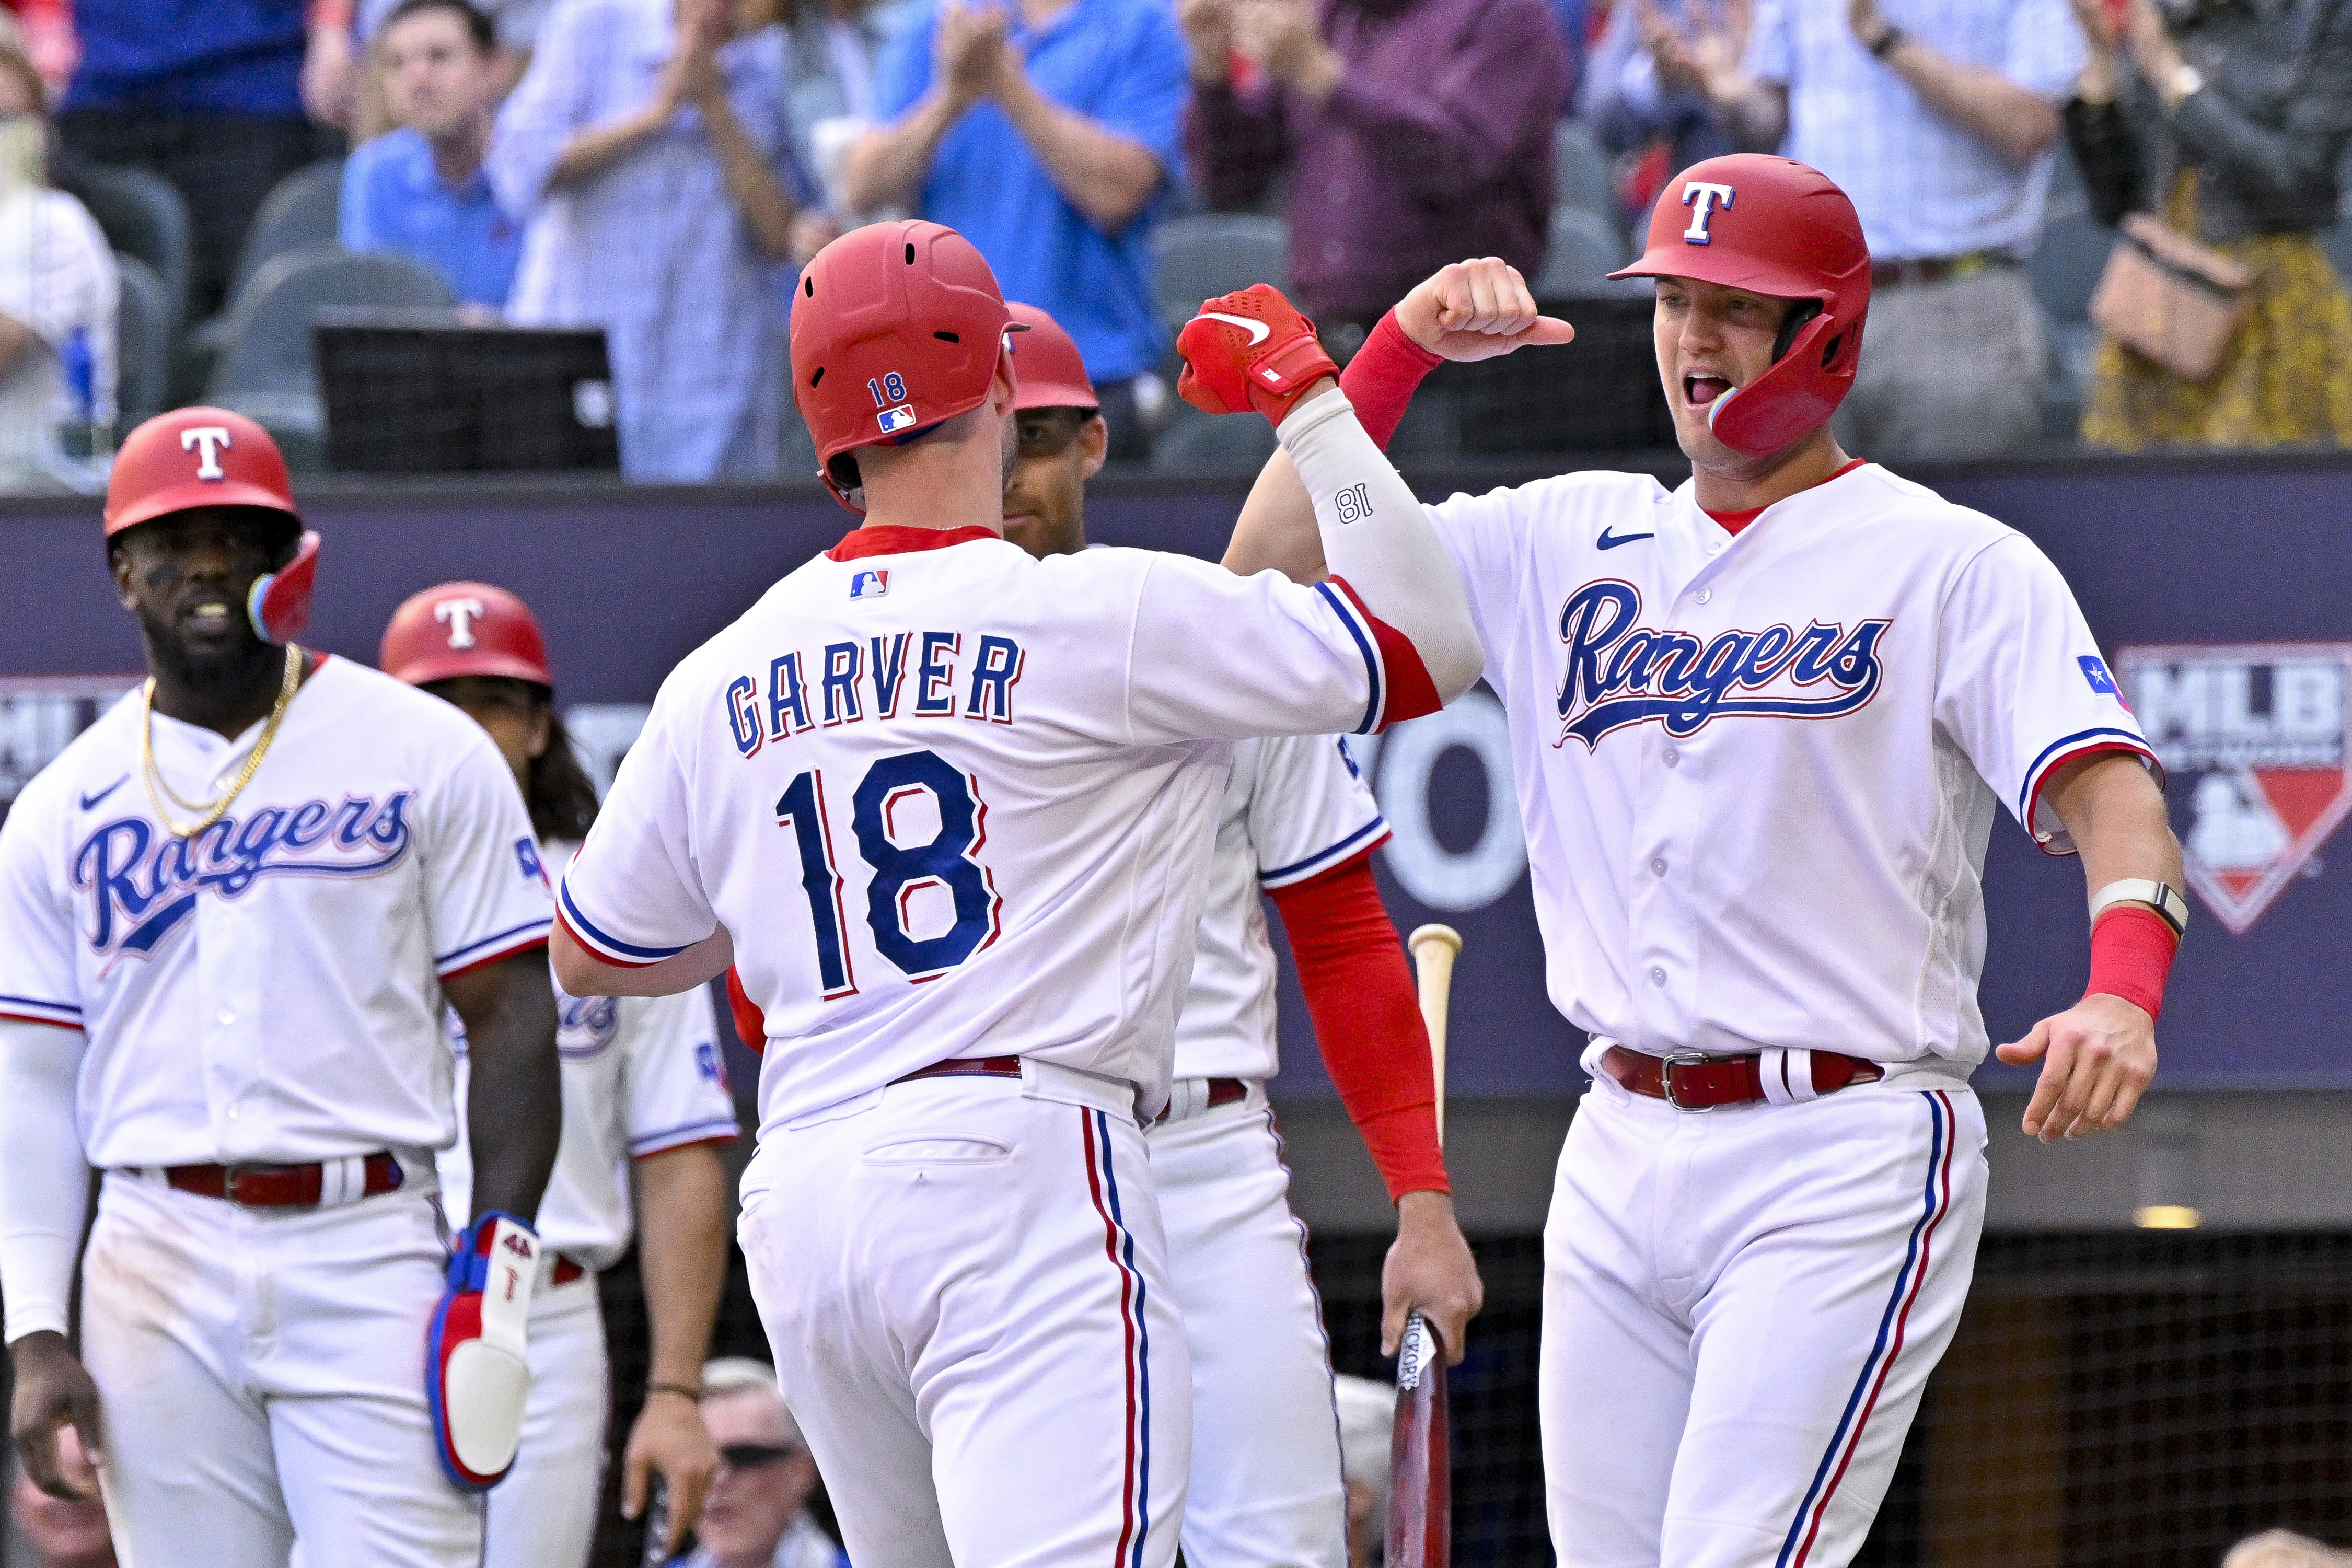 Texas Rangers catcher Mitch Garver and third baseman Josh Jung celebrate after Garver hit a three-run home run against the Philadelphia Phillies on April 1 at Globe Life Field. The Rangers outscored the defending National League champions 29-11 during a three-game, season-opening sweep.